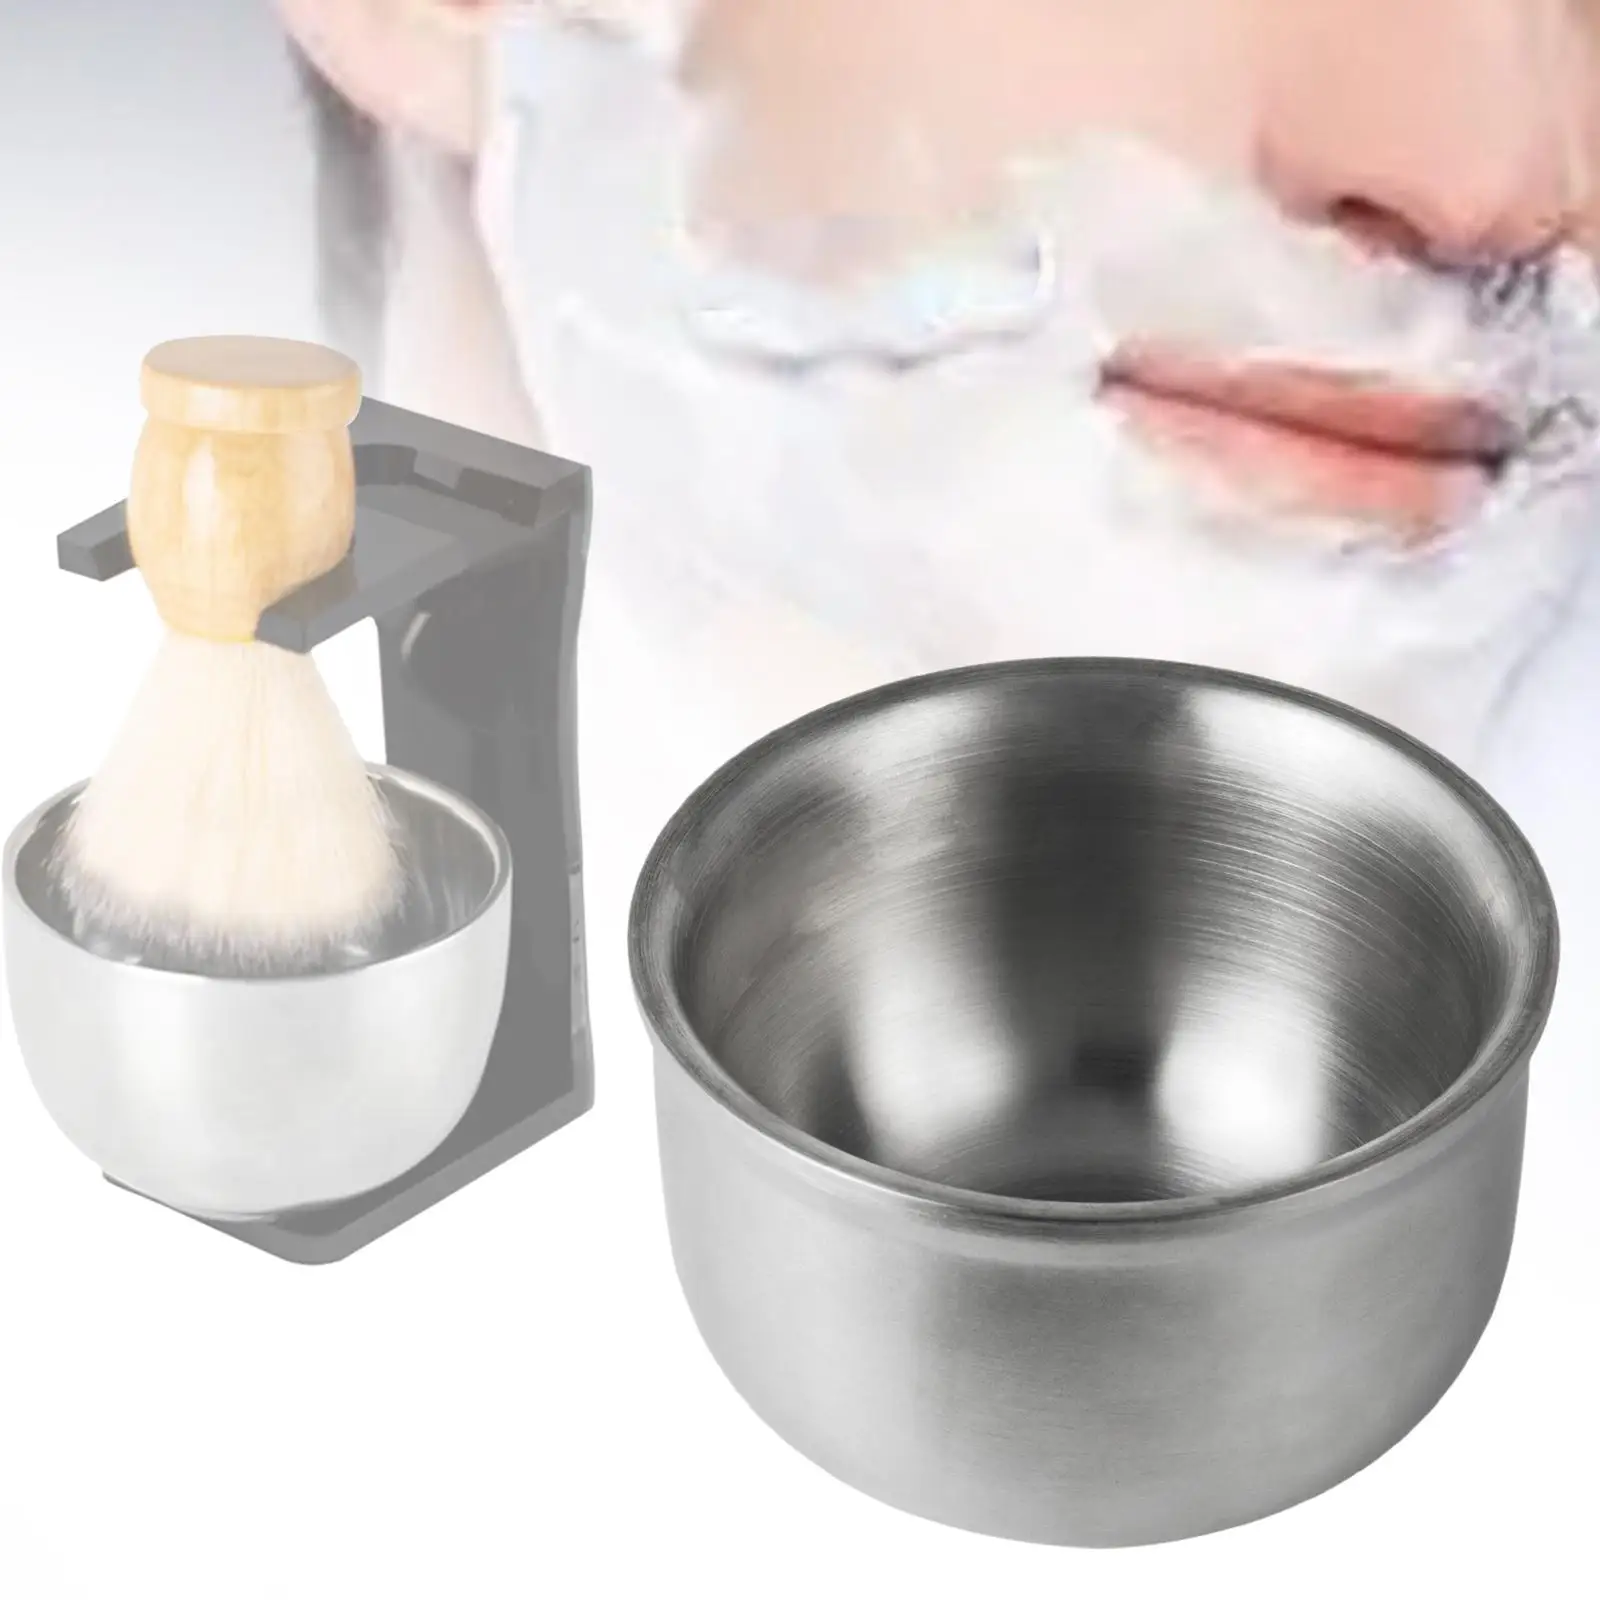 Shaving Soap Bowl Stainless Steel Produce Rich Foam Fits Wet Shave Small Portable Smooth Shave Cream and Soap Bowl for Men Gift